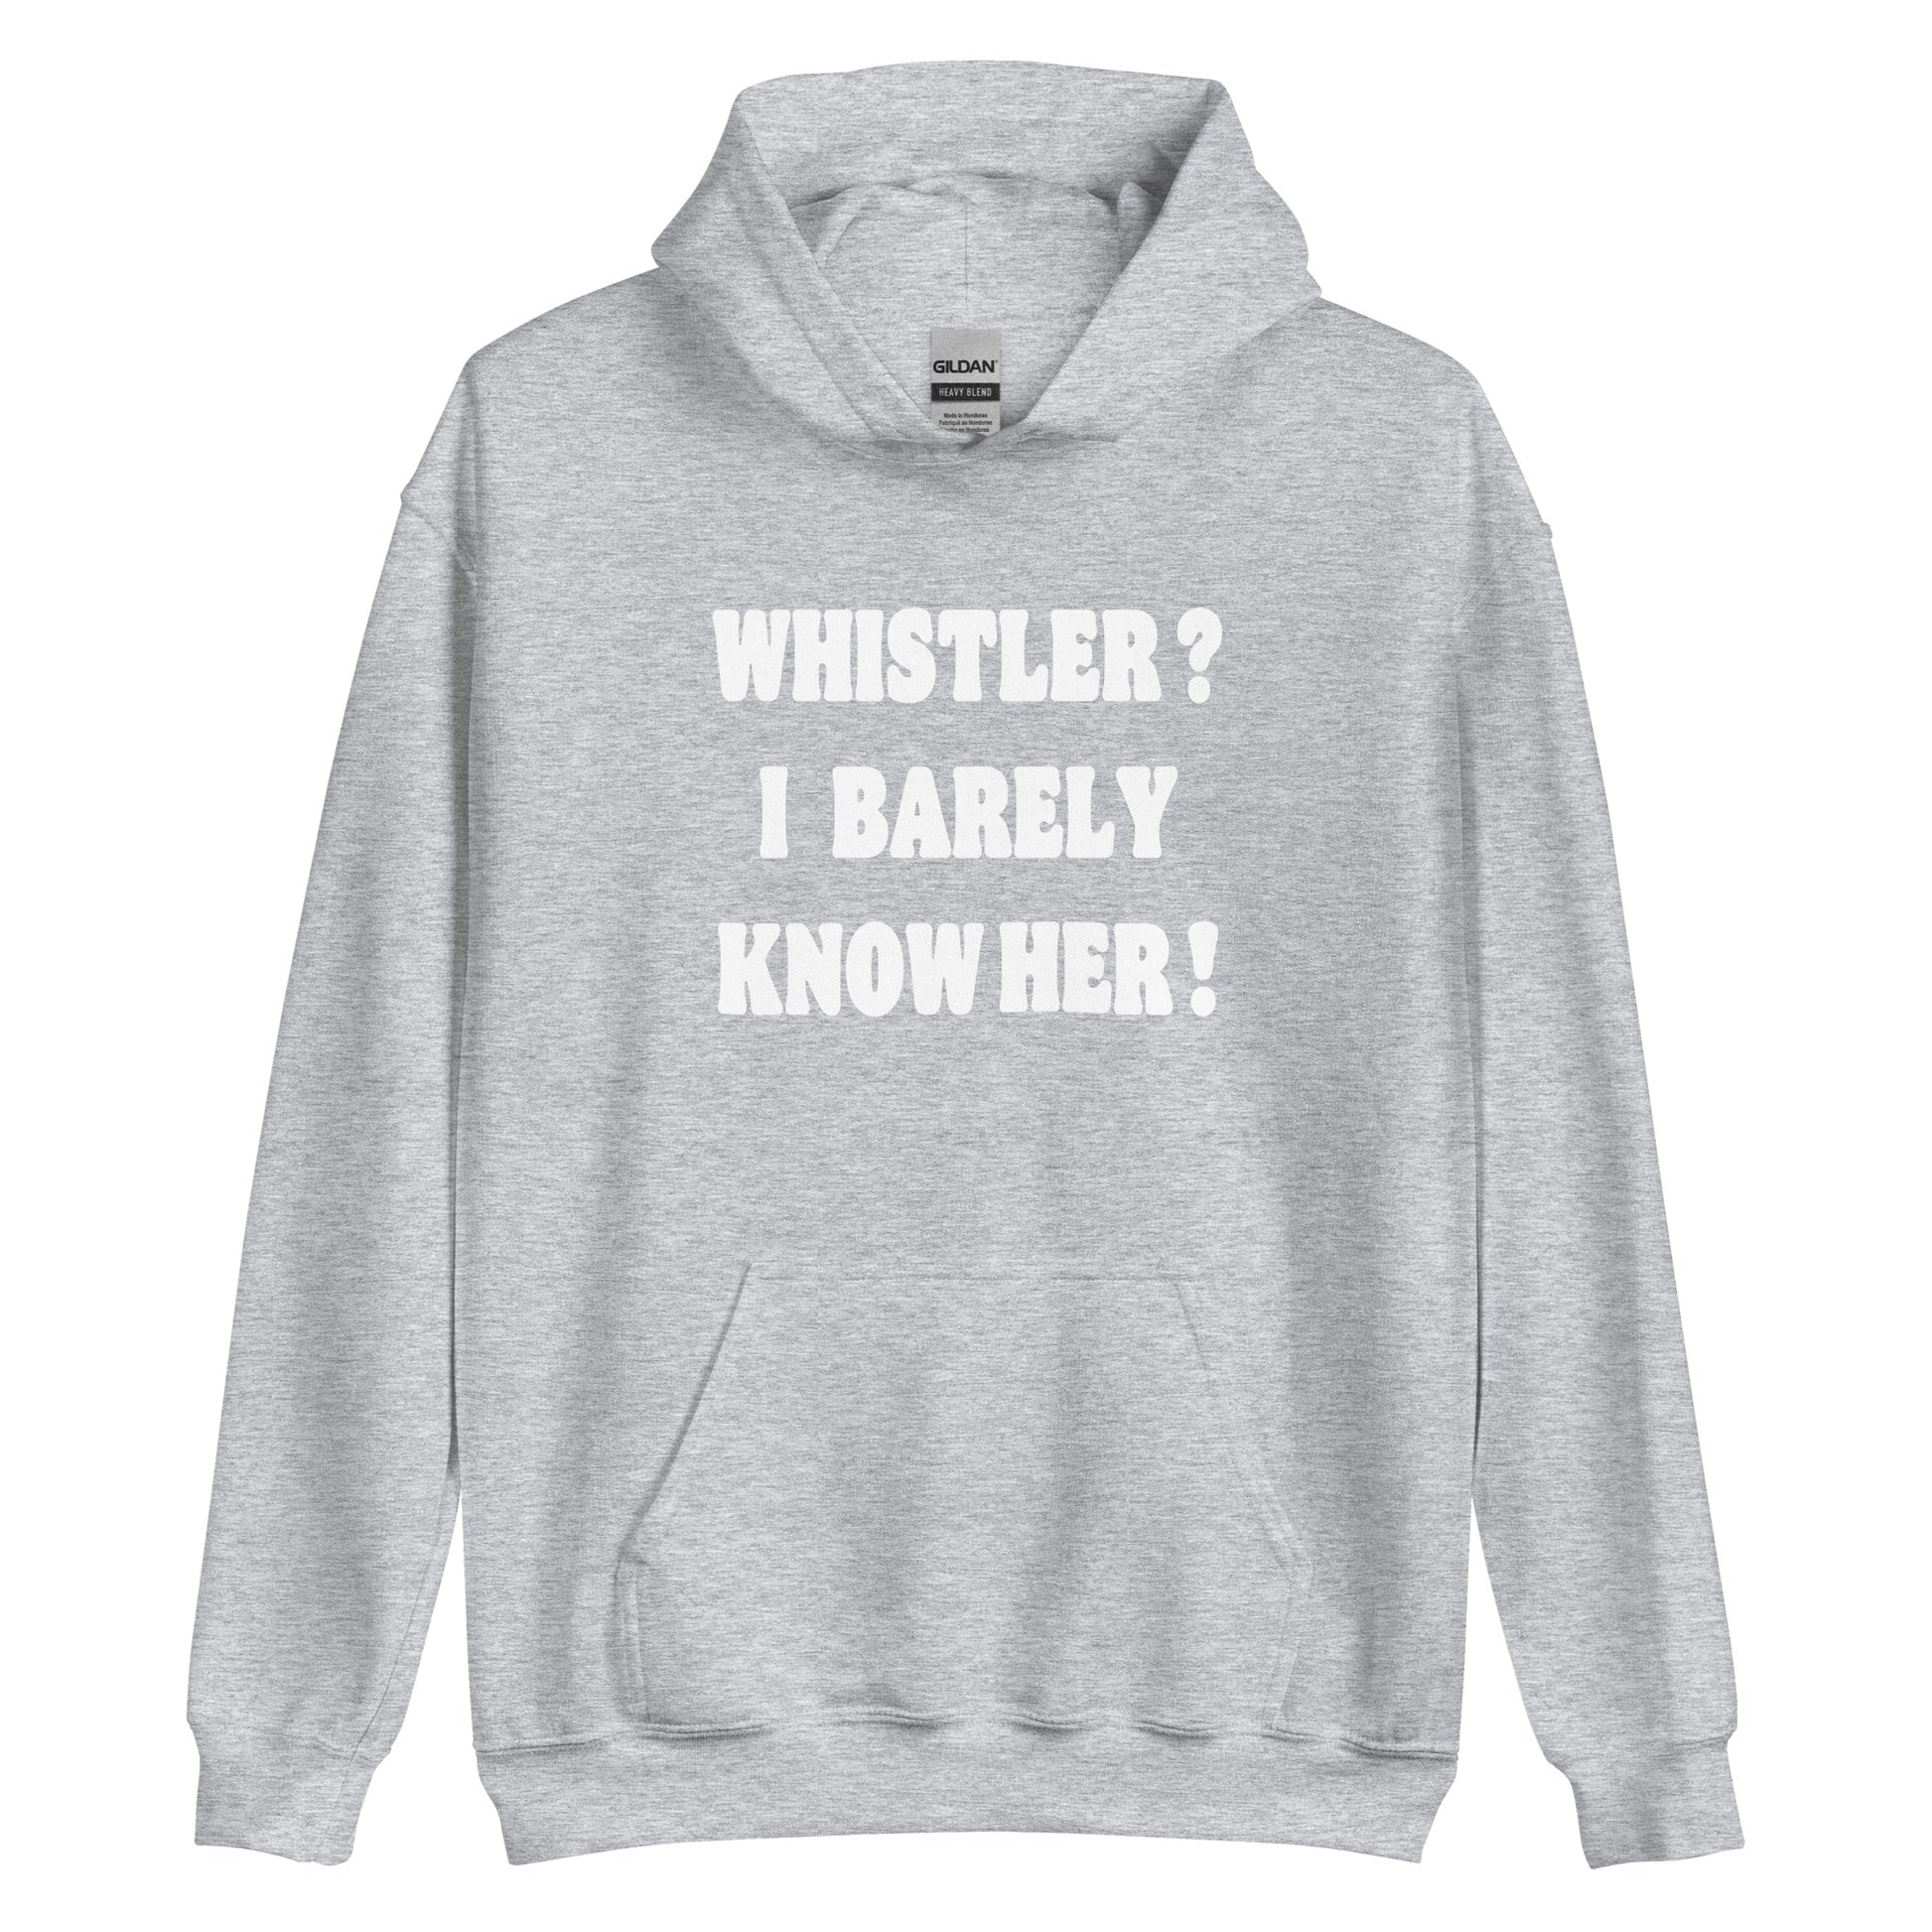 Whistler? I barely know her! Printed hoodie by Whistler Shirts